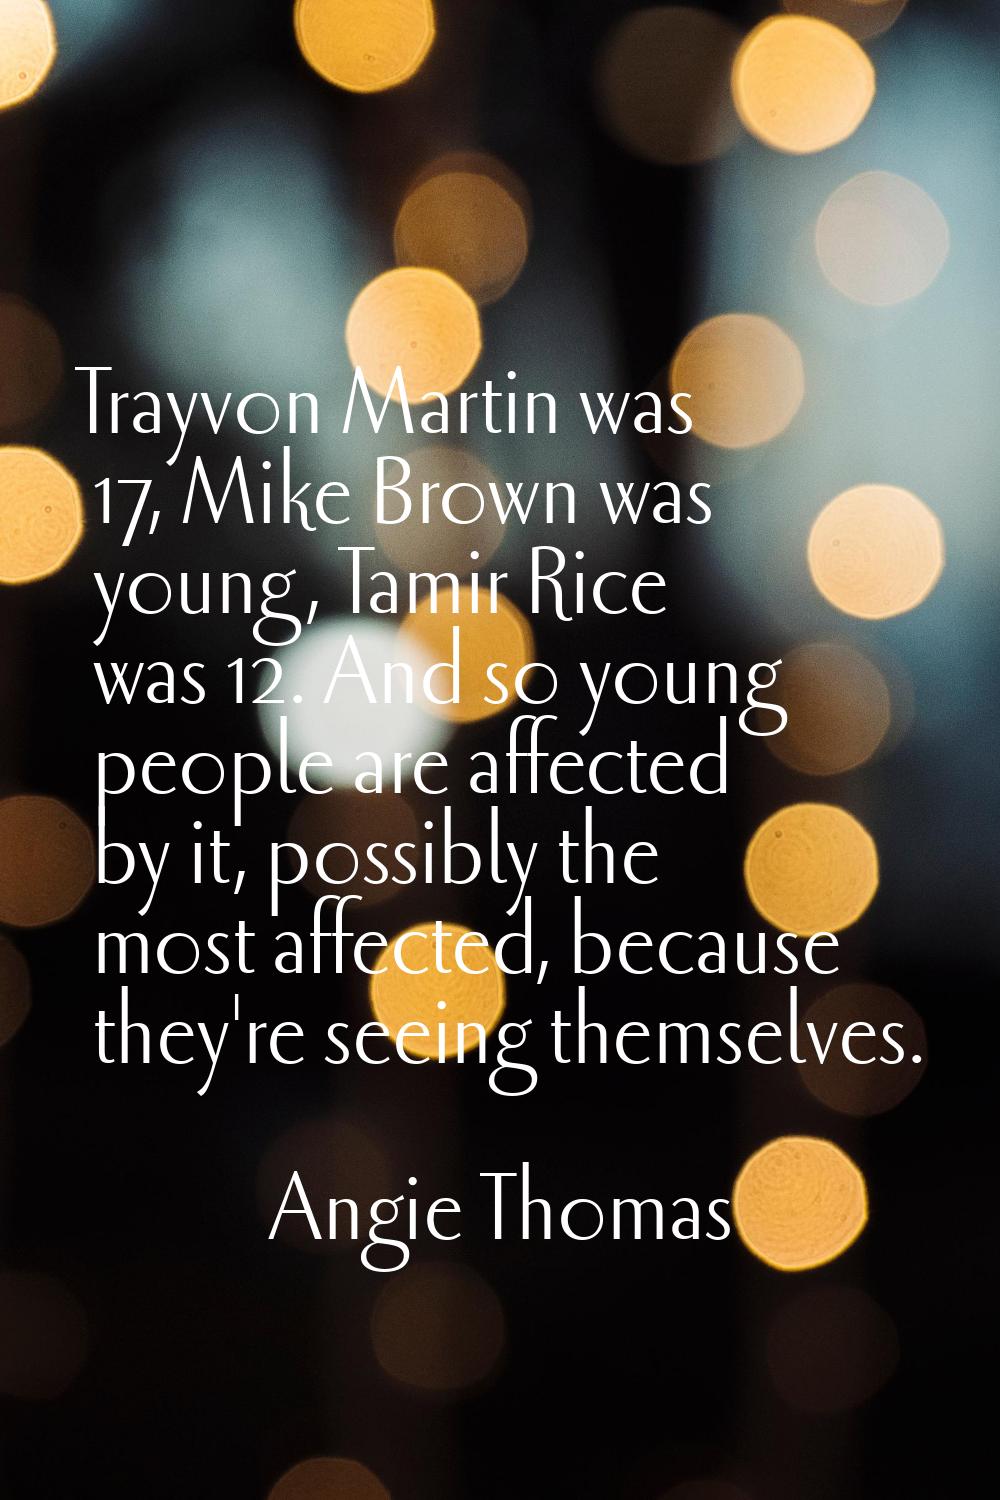 Trayvon Martin was 17, Mike Brown was young, Tamir Rice was 12. And so young people are affected by